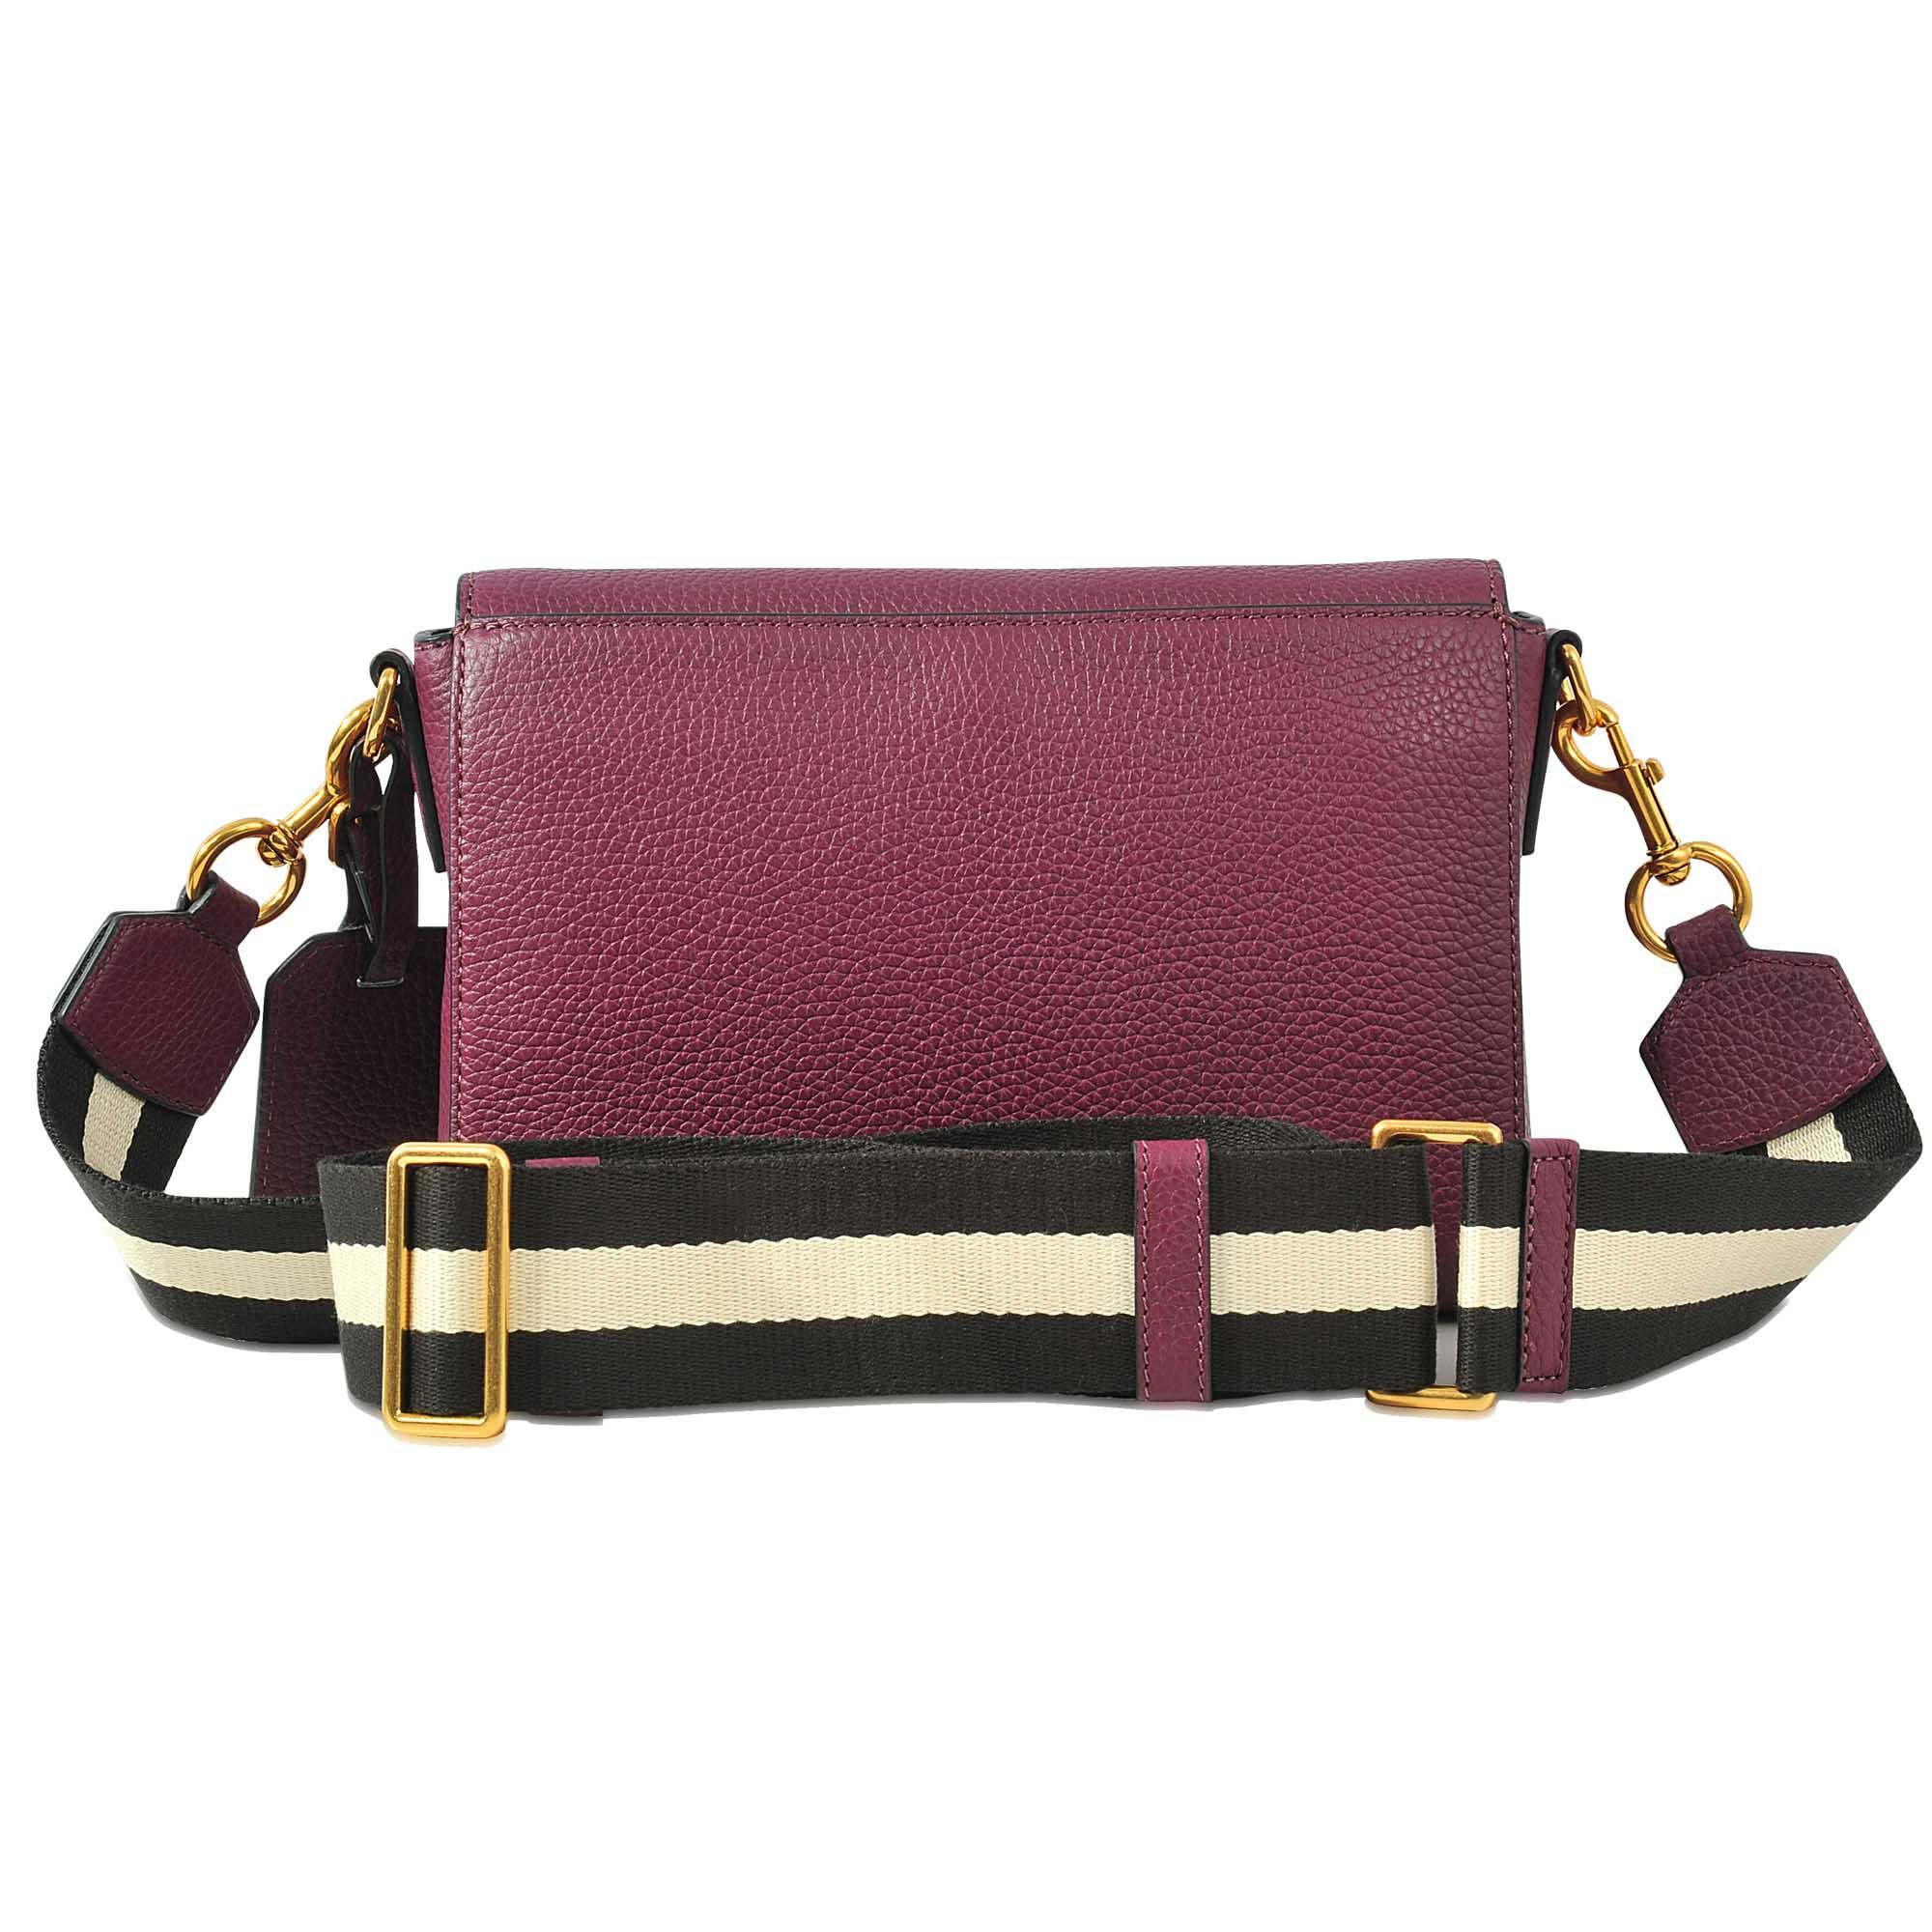 Marc Jacobs Gotham City Small Shoulder Bag in Purple - Lyst